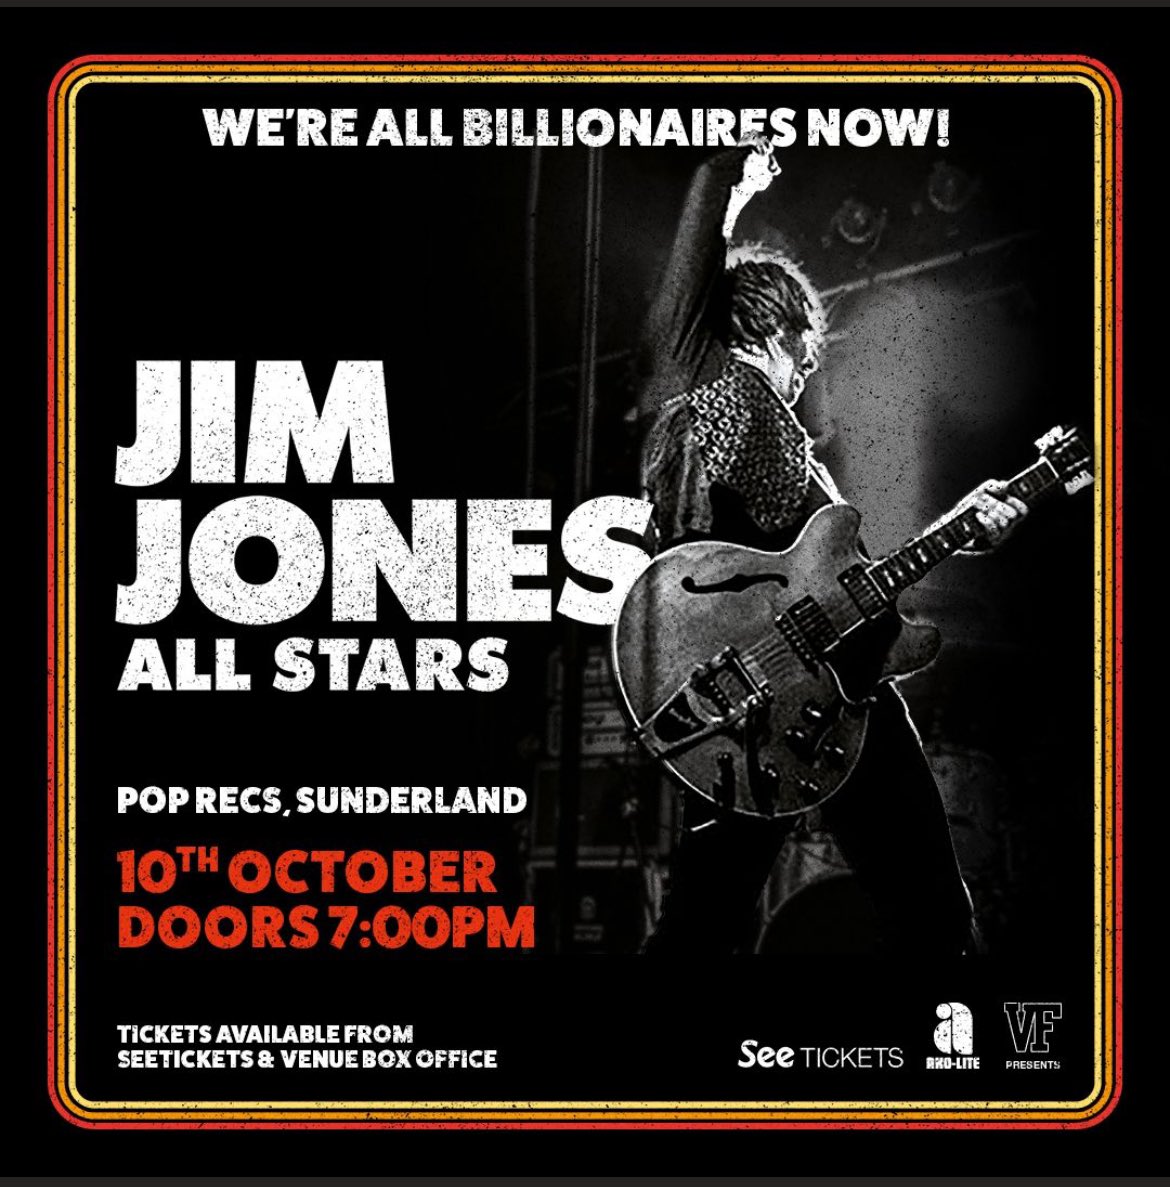 WE’RE ALL BILLIONAIRES NOW!!! & In celebration of our new found wealth, we’re heading for our first visit to @poprecsltd in SUNDERLAND on 🗓️ 10/10/24 🎫 Via @seetickets NOW! SPREAD THE NEWS!